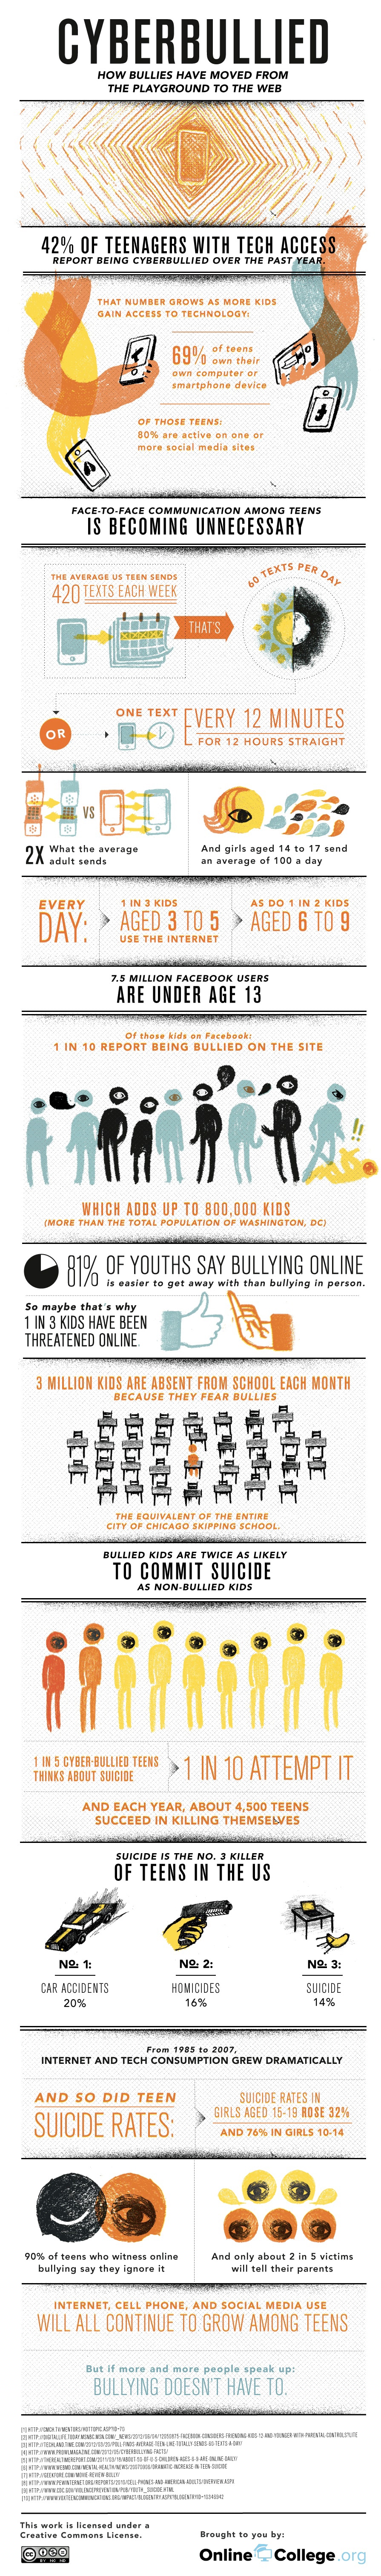 Bullying-On-The-Internet-Infographic